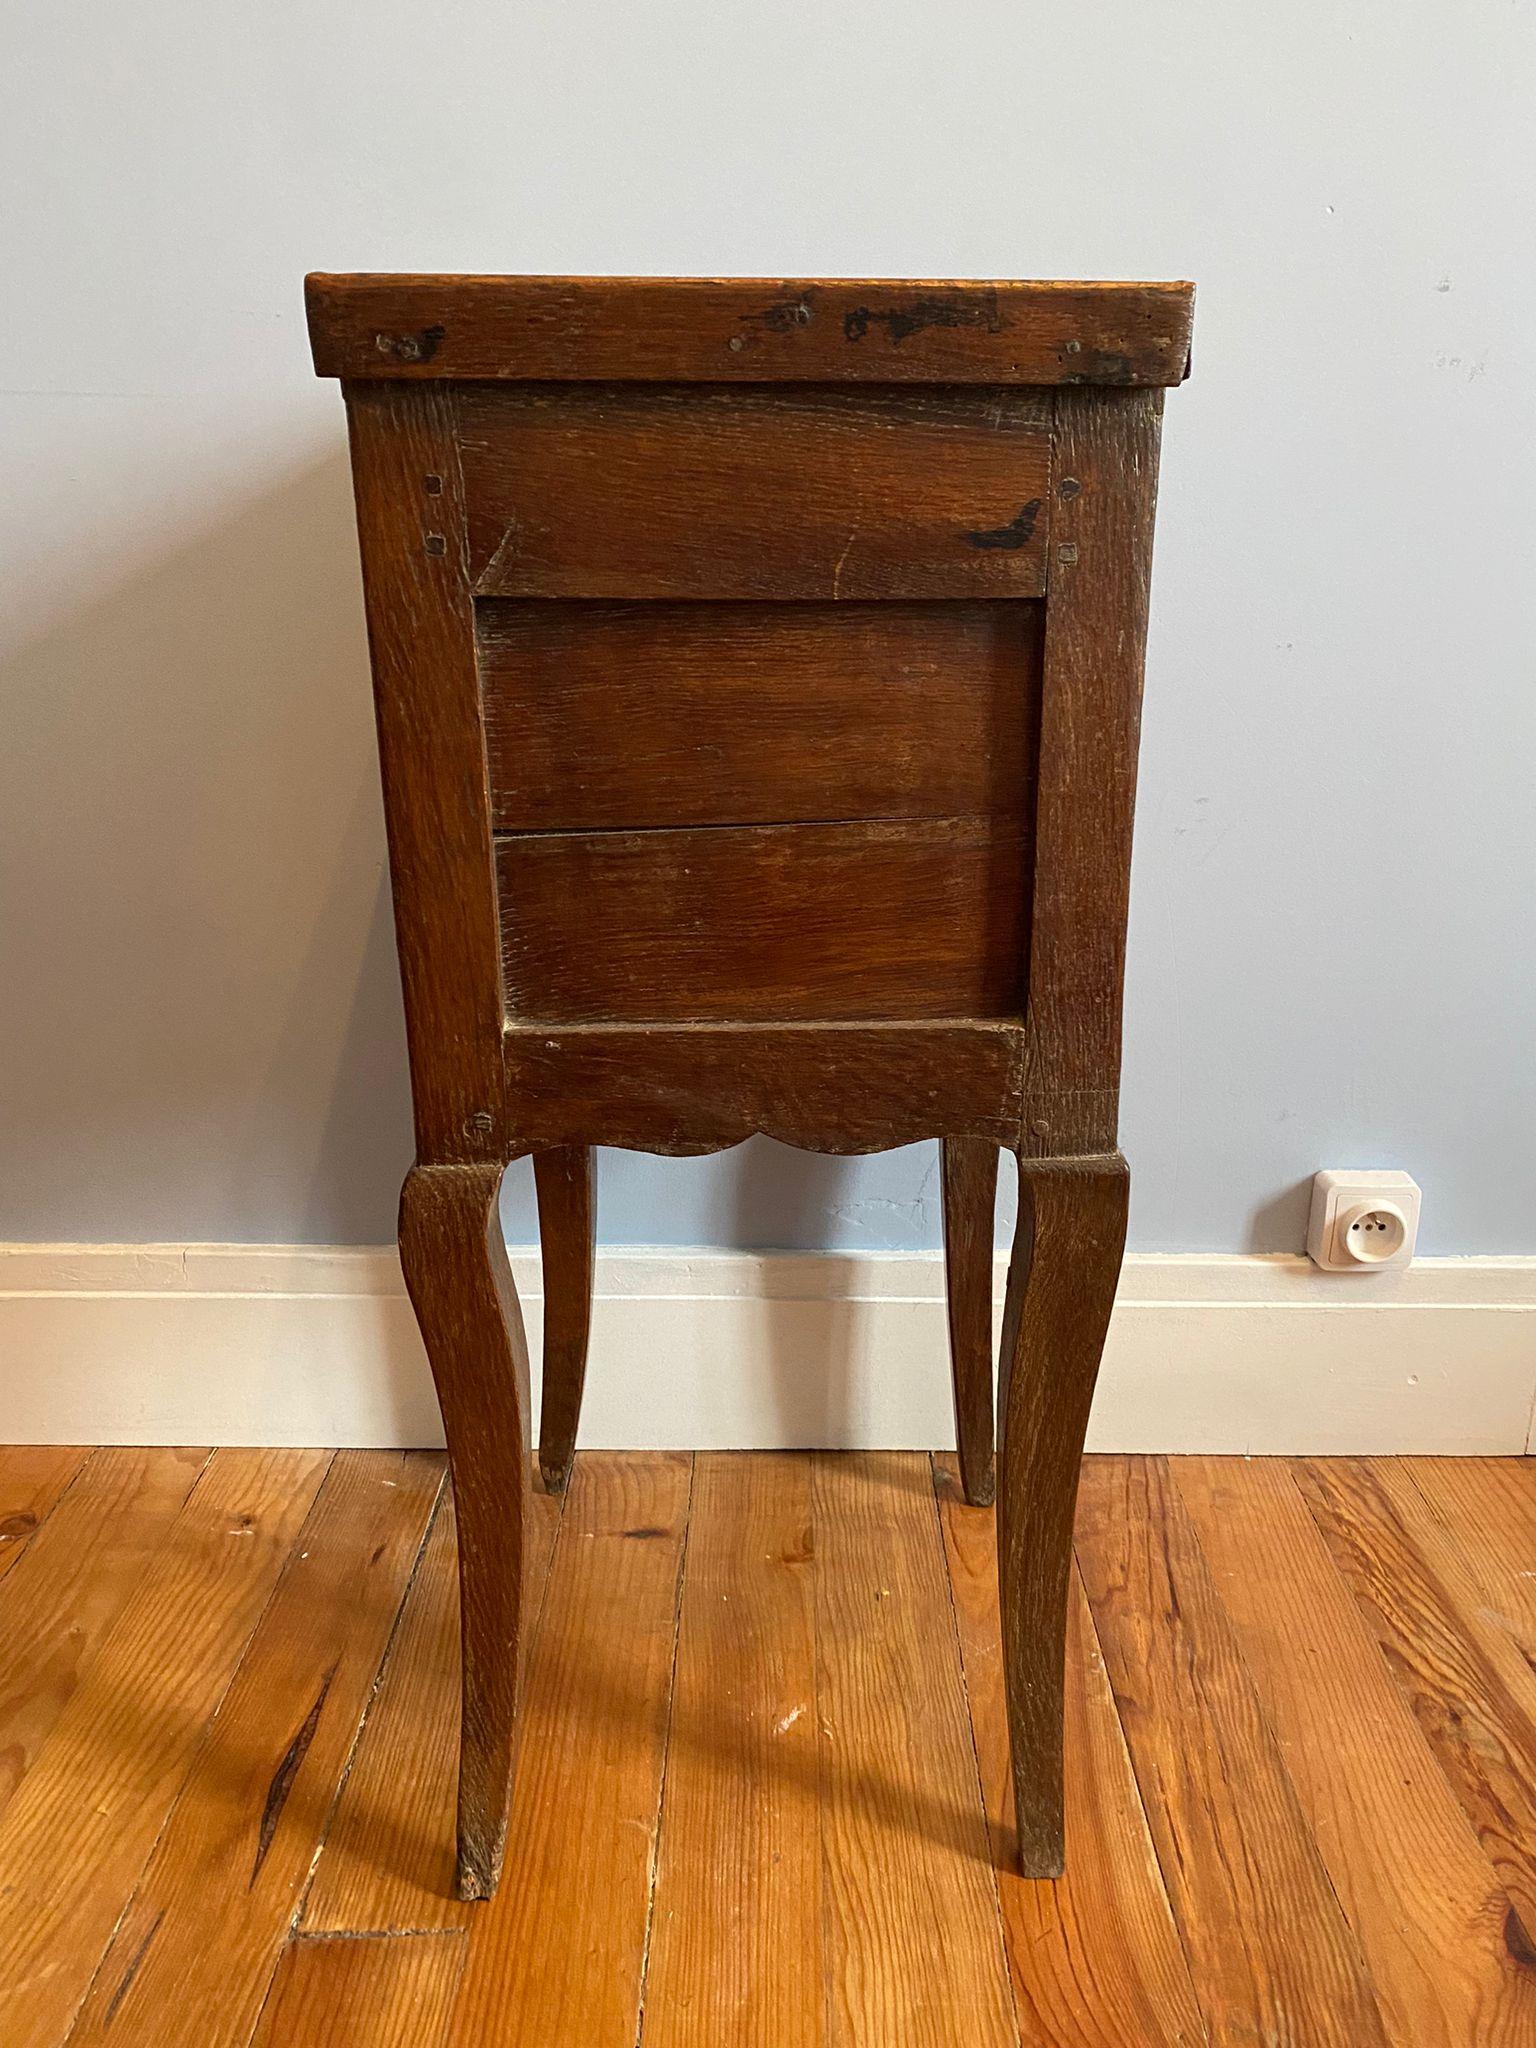 Nice little 18th century bedside table, Night Table, Nightstand from the Louis XV period. 
The legs are curved, there is a drawer along the length of the top rail and a central hollow space for placing objects.
Very Beautiful French work

XVIIIth -